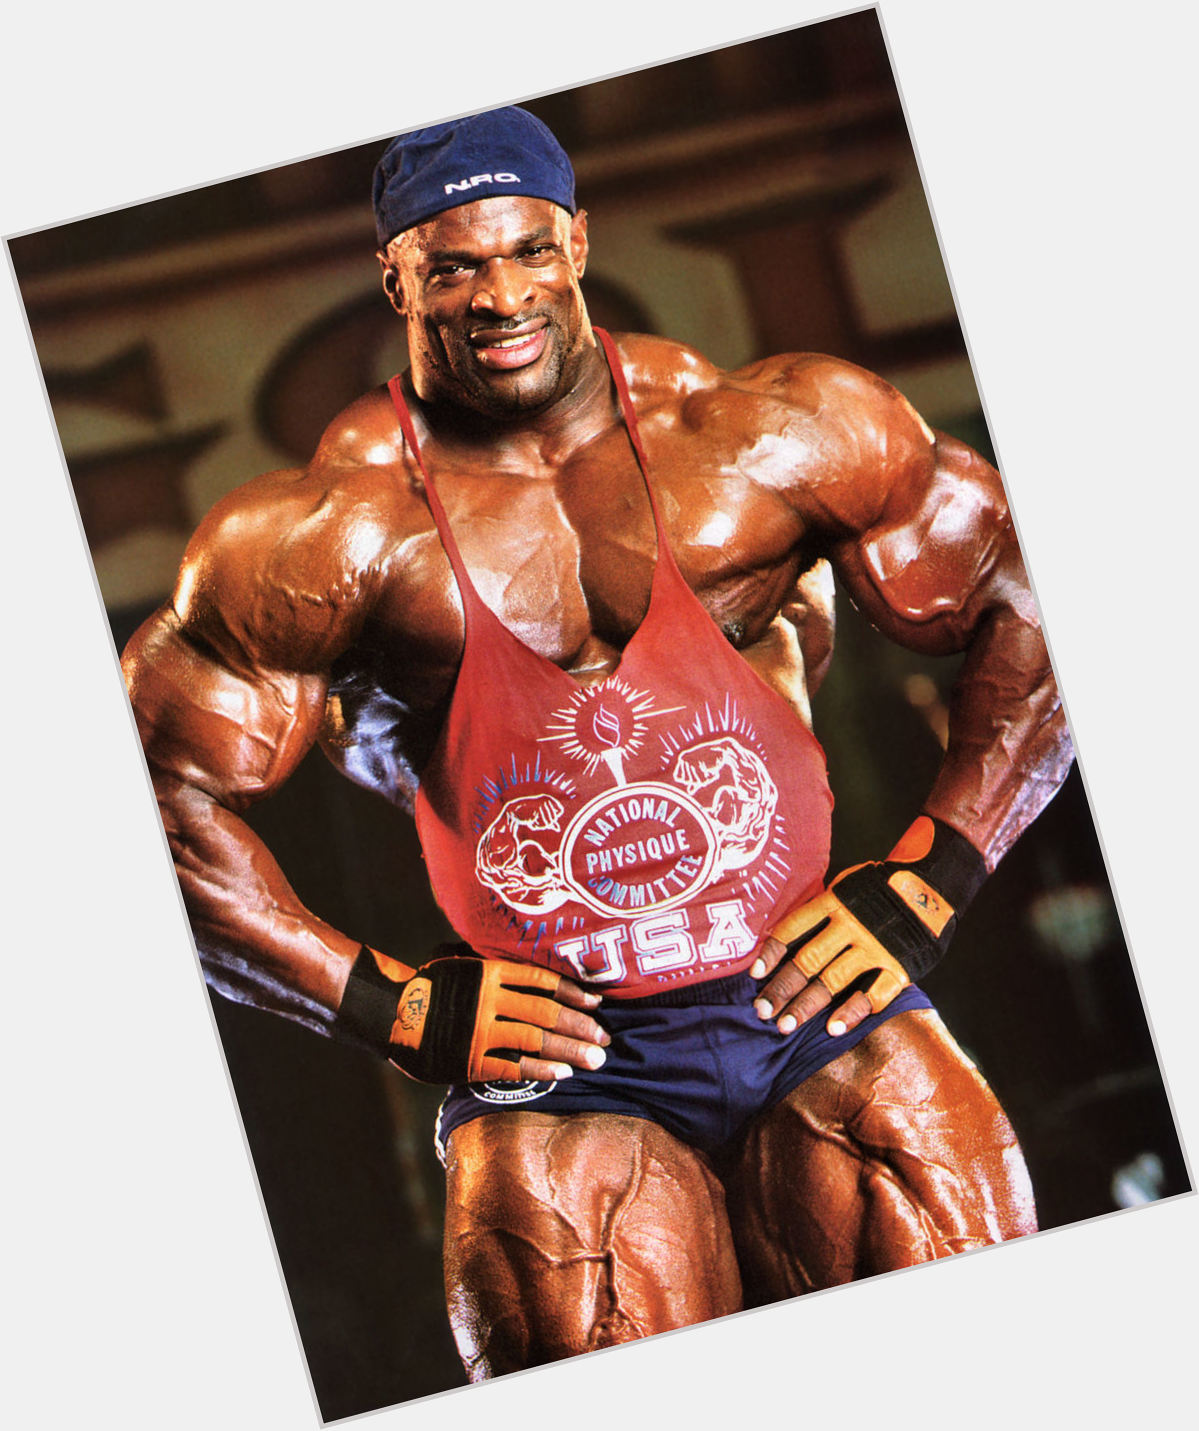 Ronnie Coleman exclusive hot pic 6.jpg